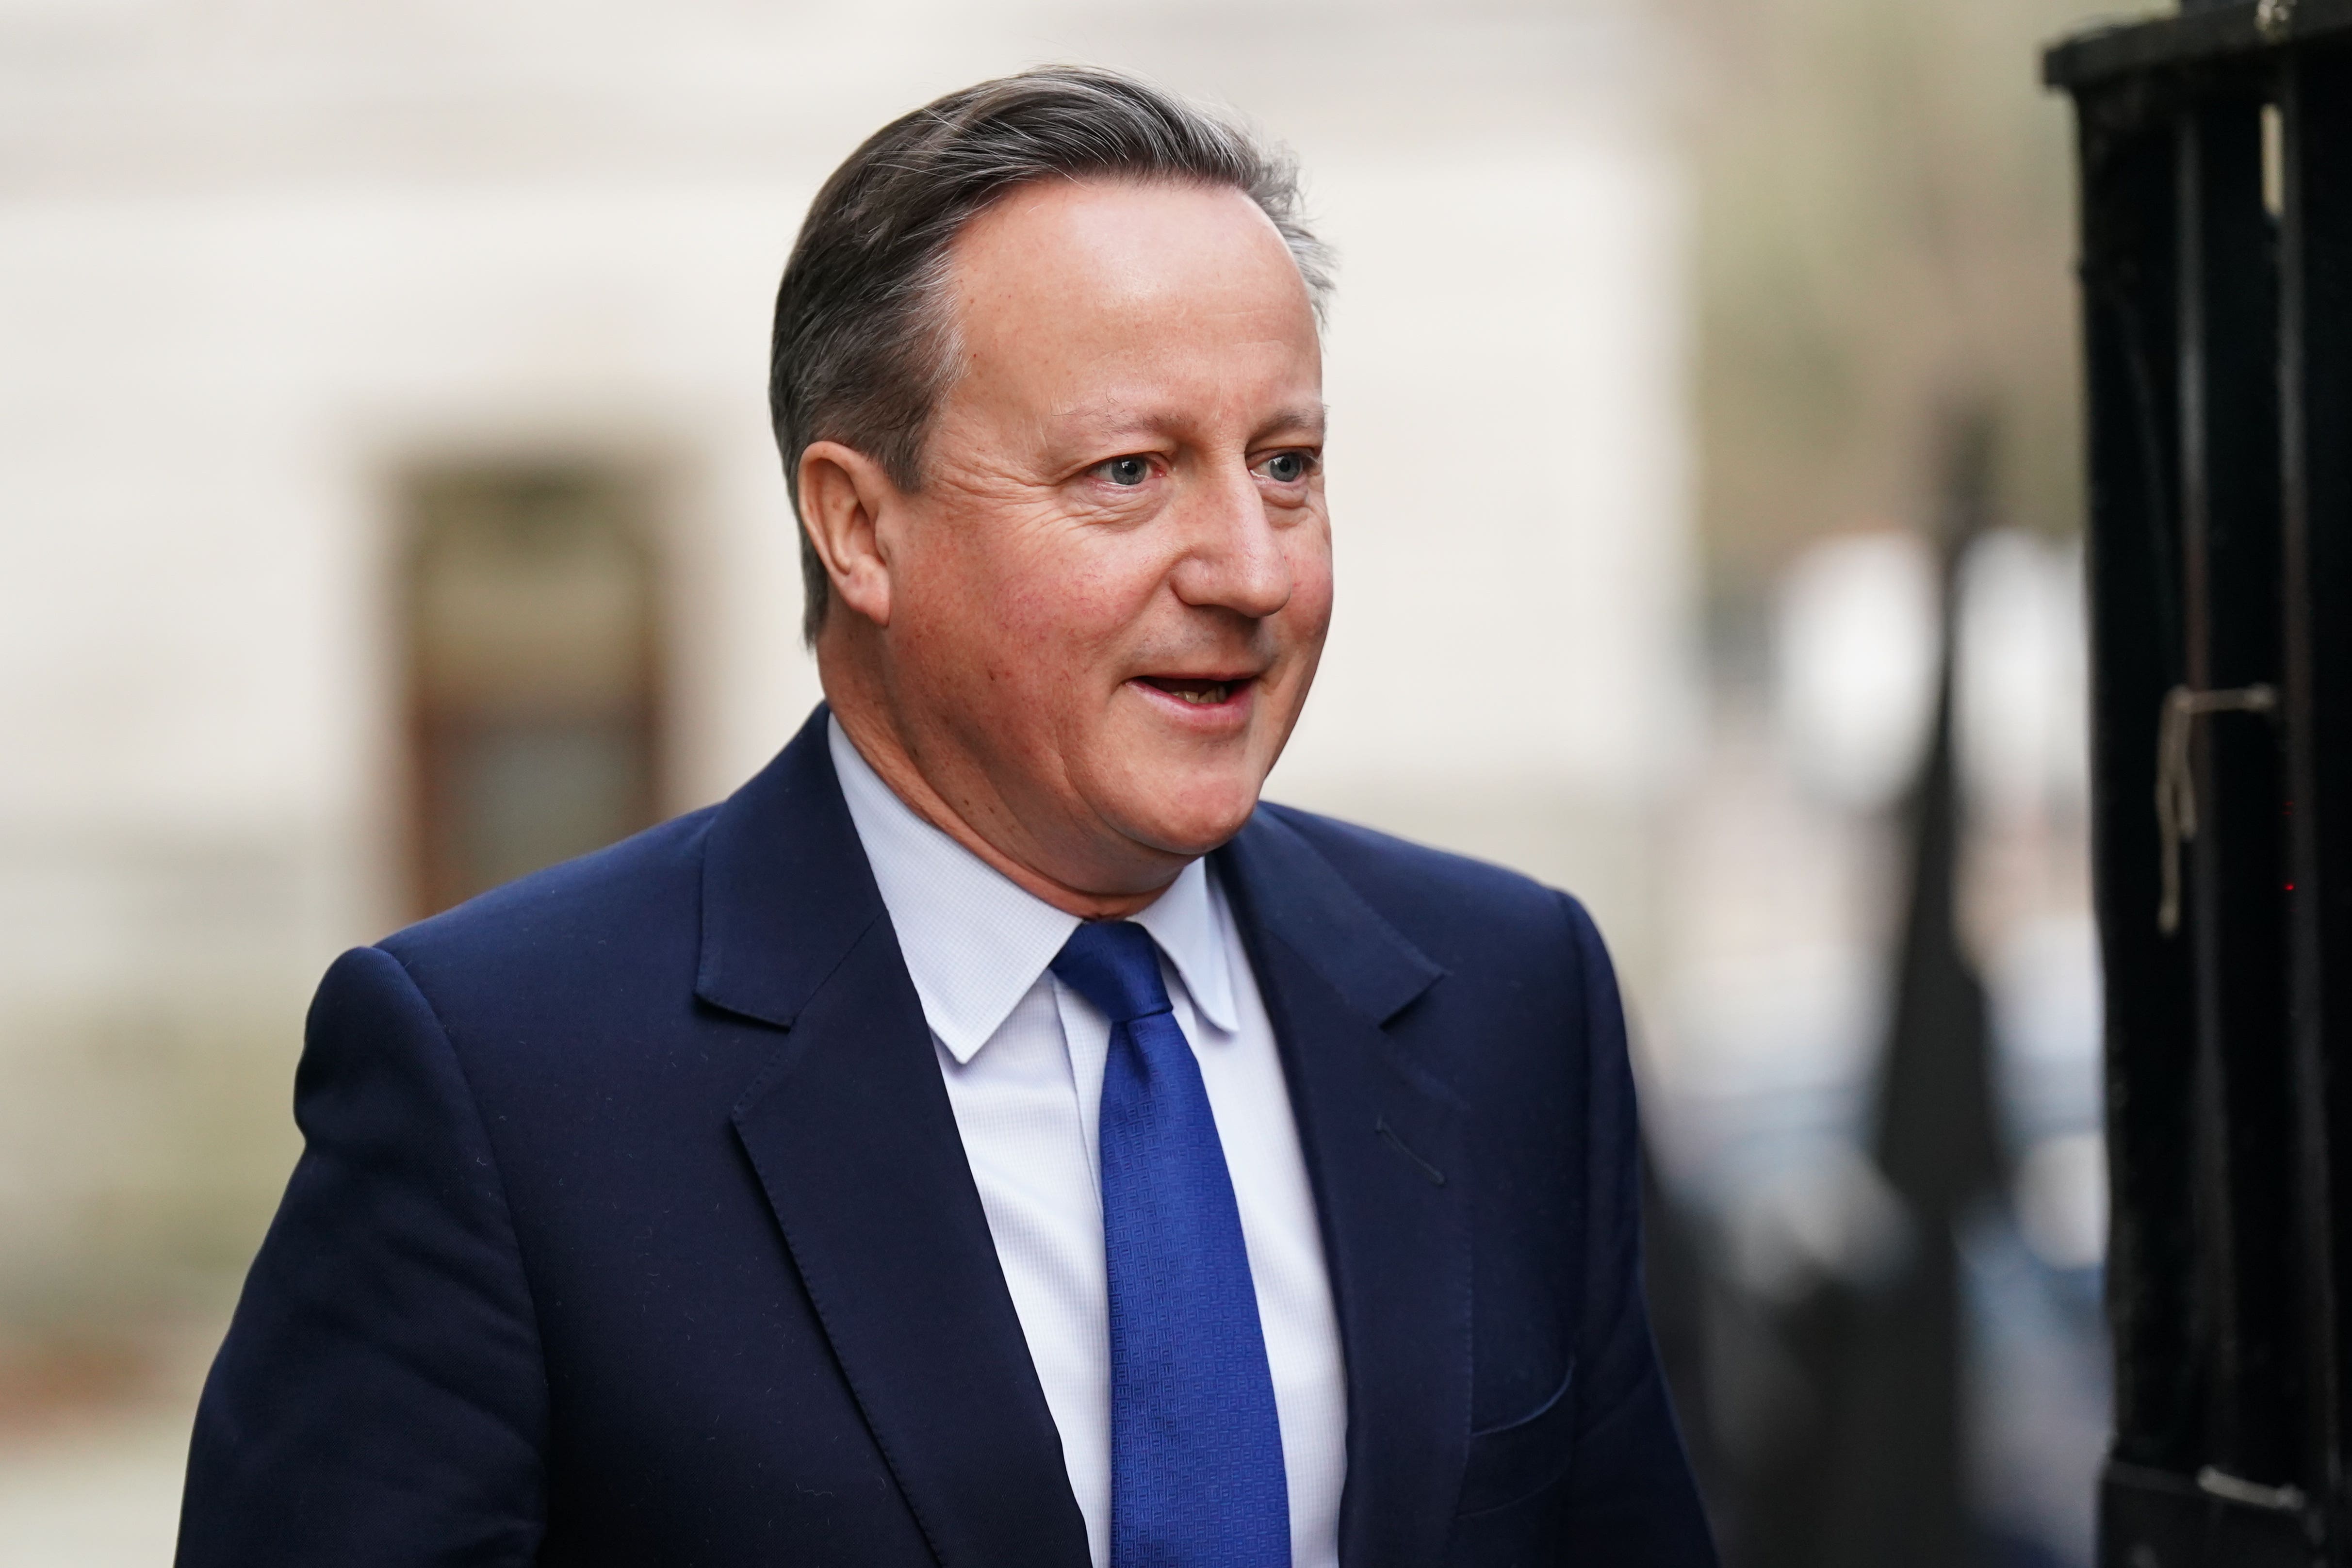 David Cameron said Britain ‘backs up our words and warnings with action’